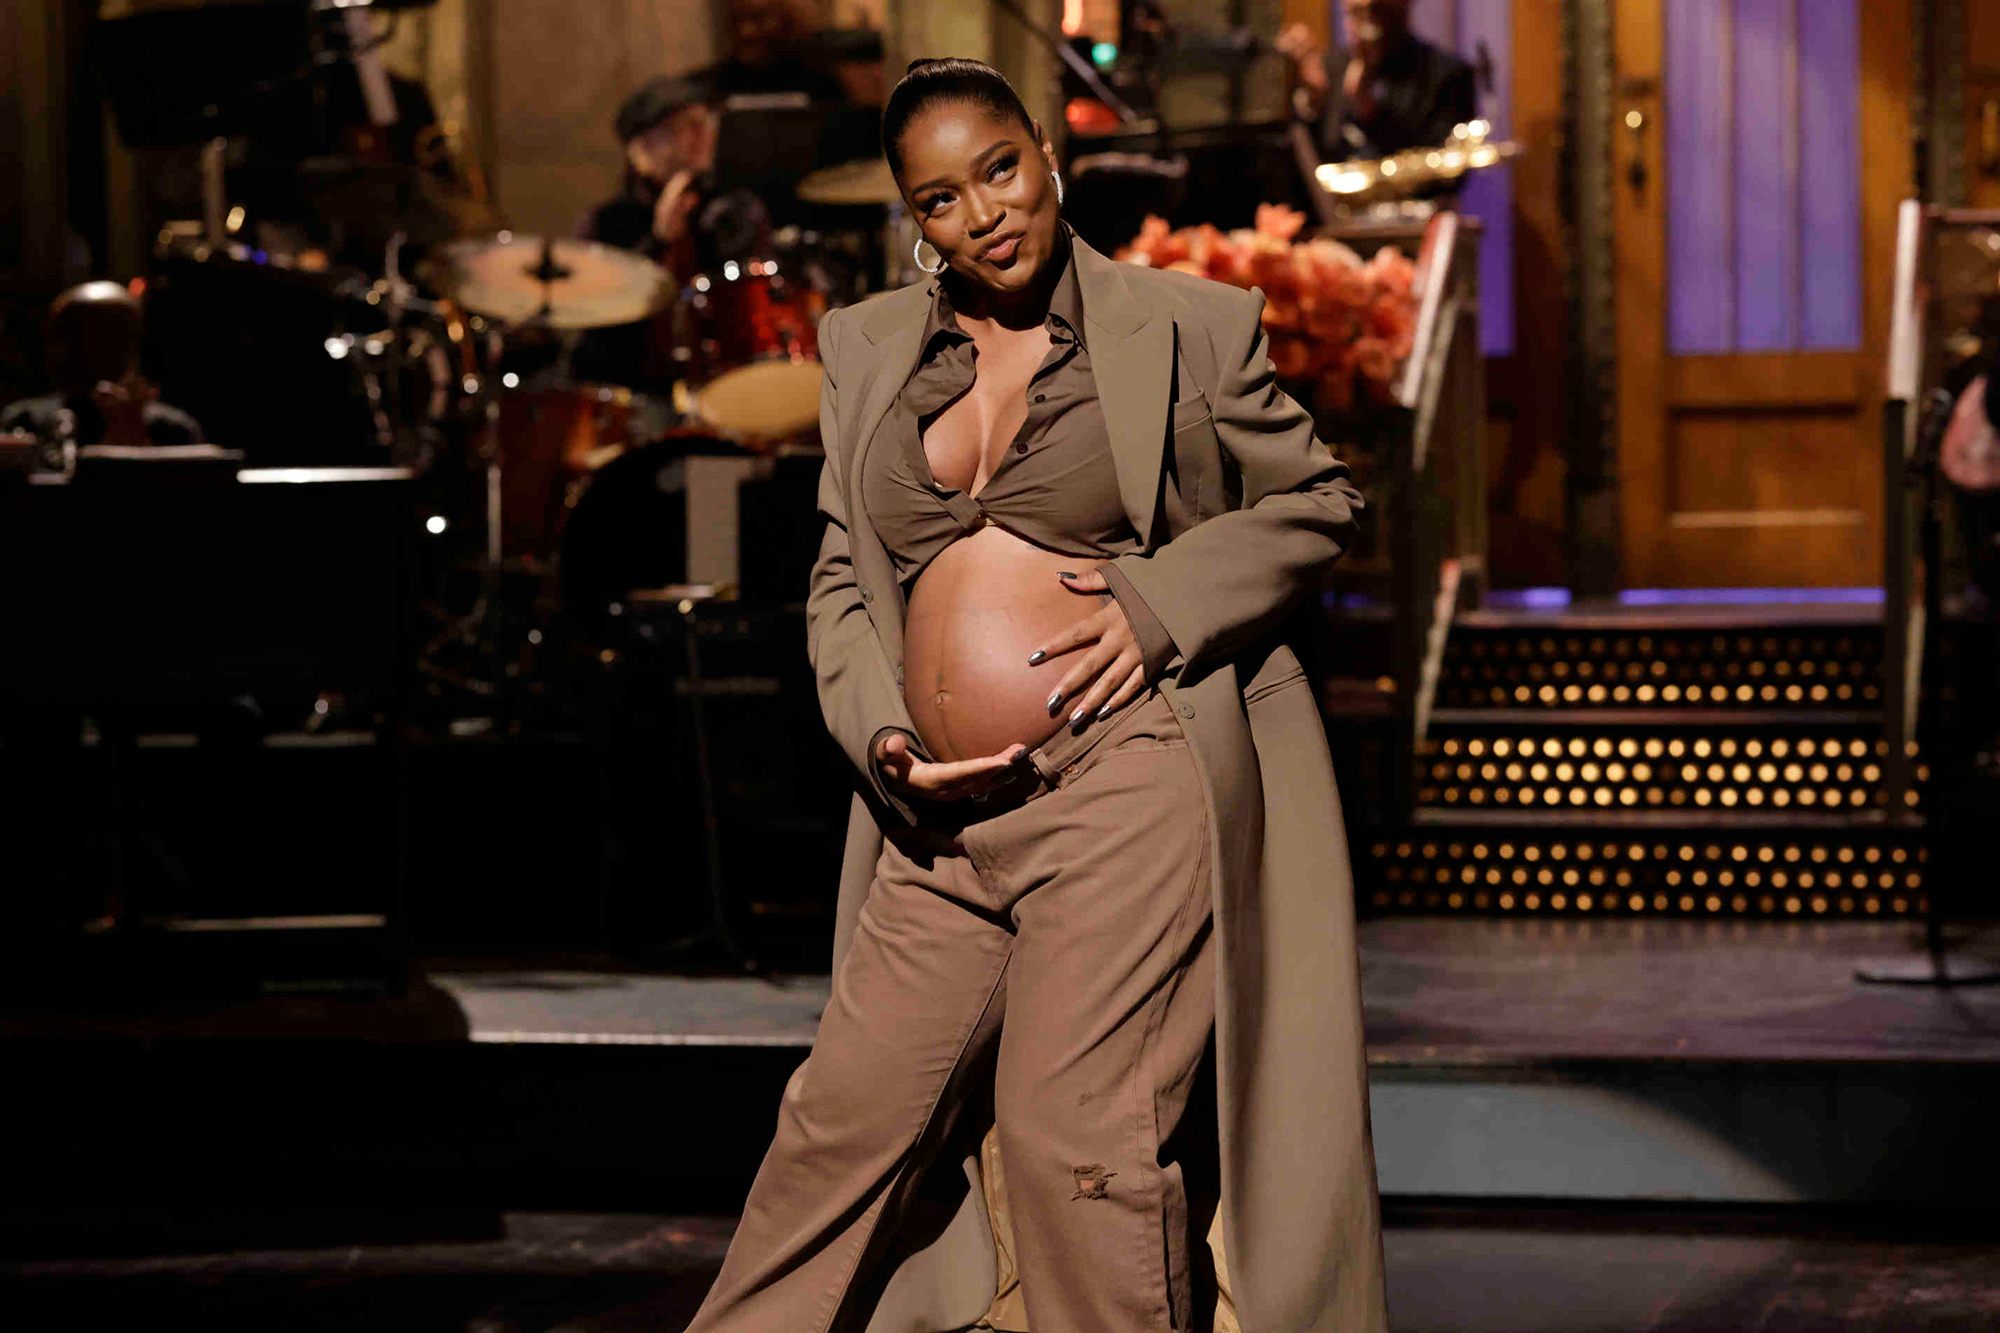 Keke Palmer Is Pregnant With 1st Child, Debuts Baby Bump on ‘Saturday Night Live’: 'I Am So Excited'